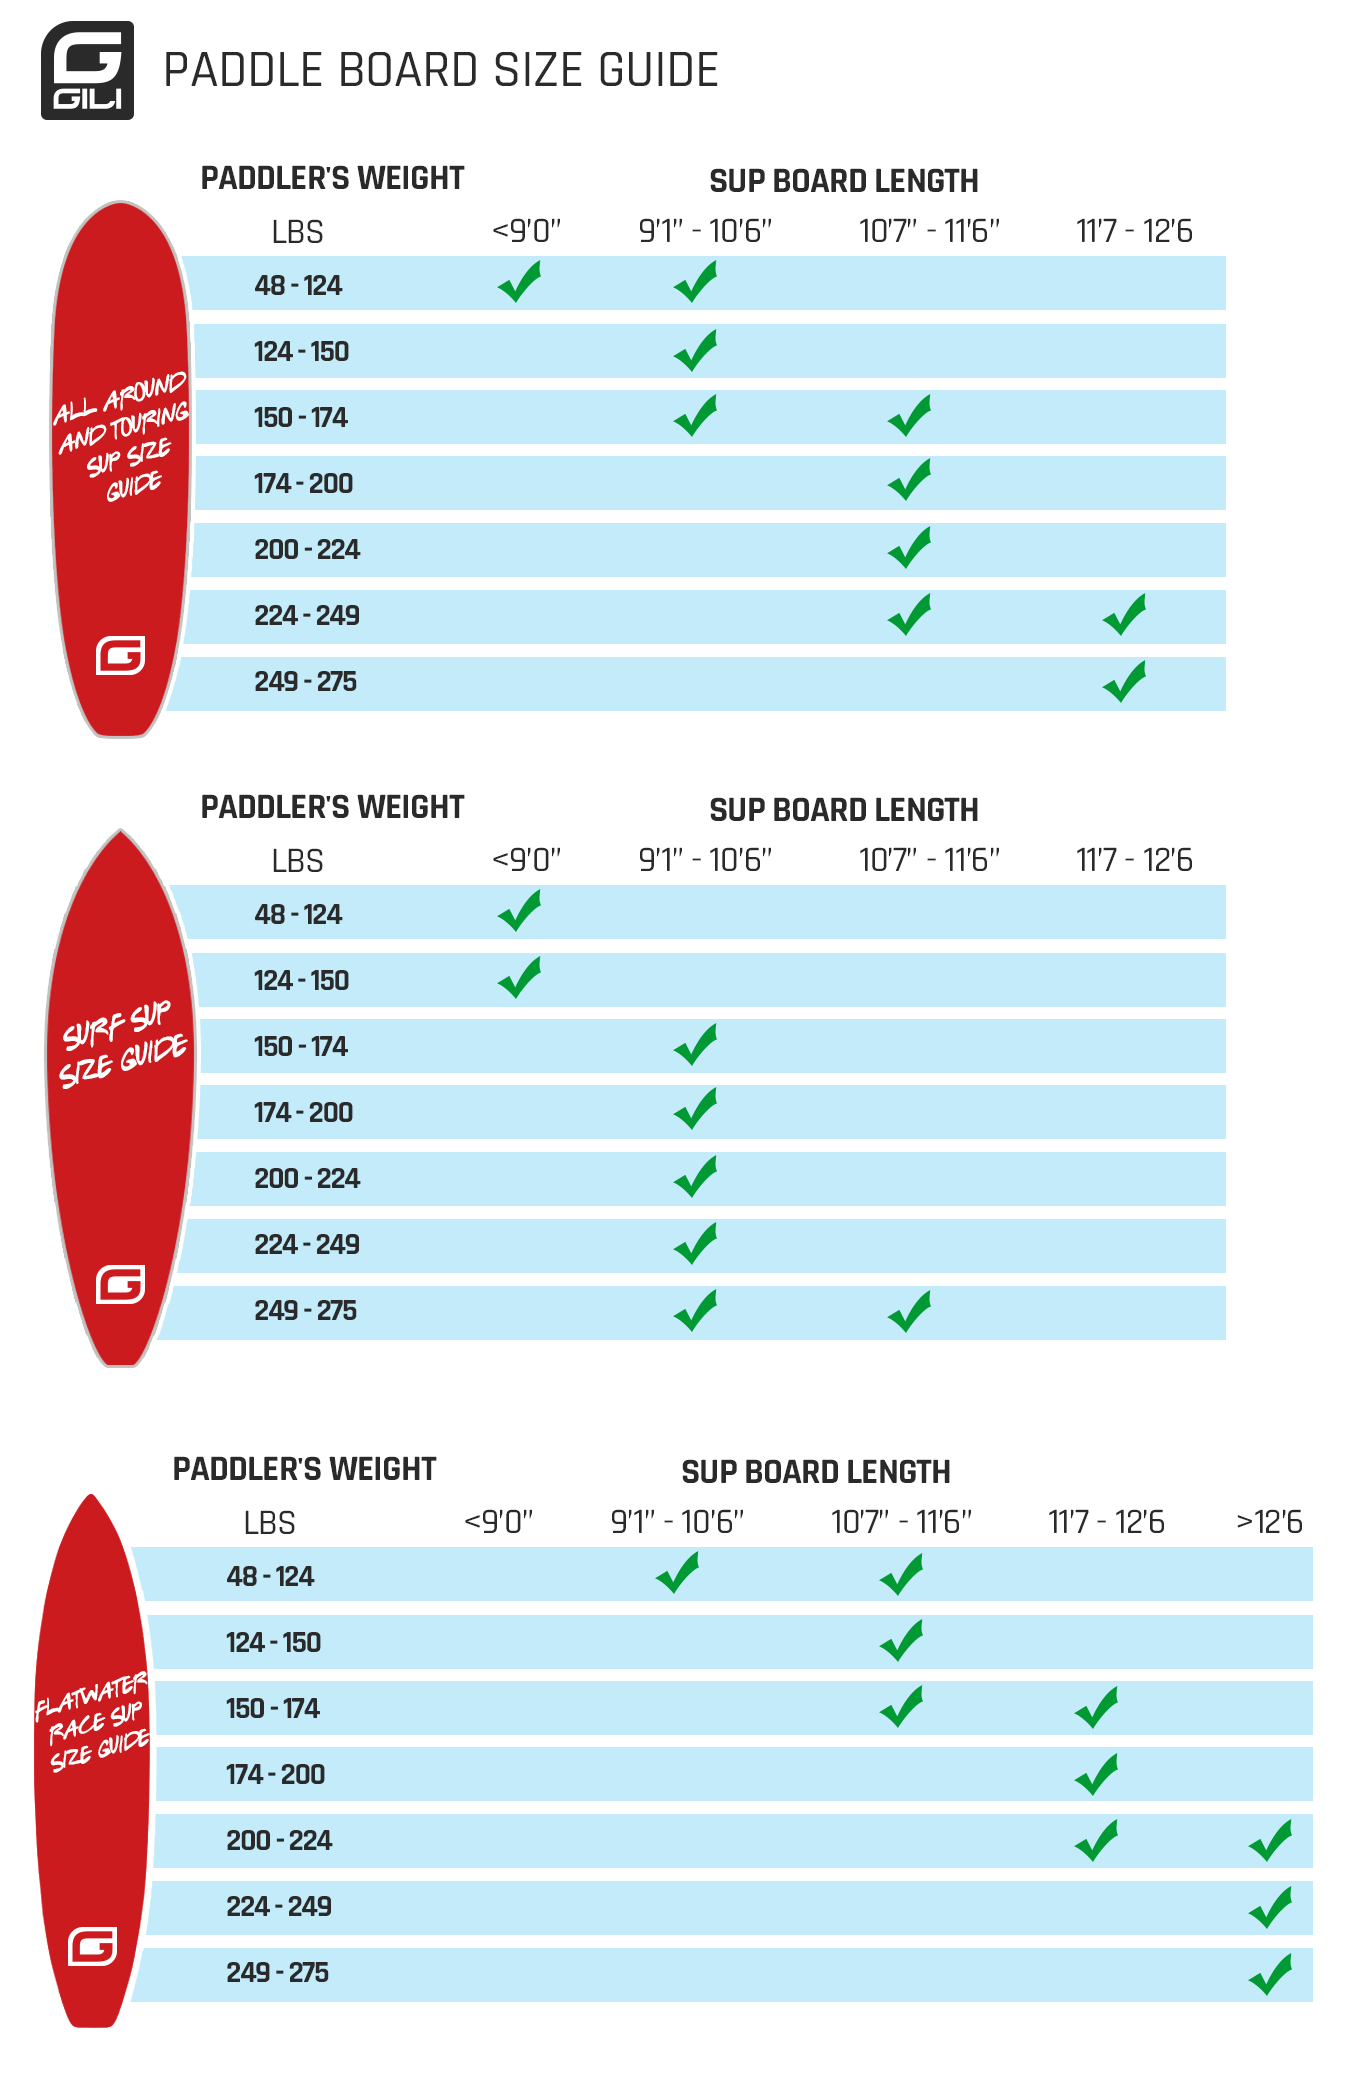 Paddle Board Length Guide